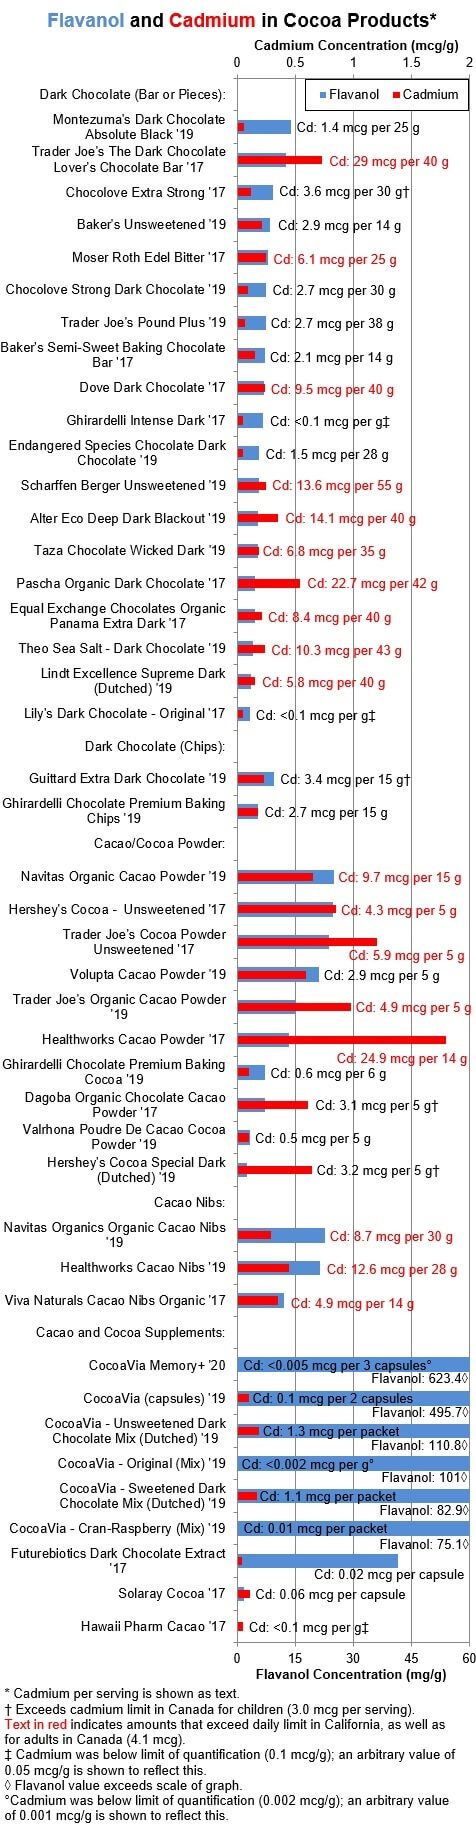 Flavanol and Cadmium in Cocoa Products